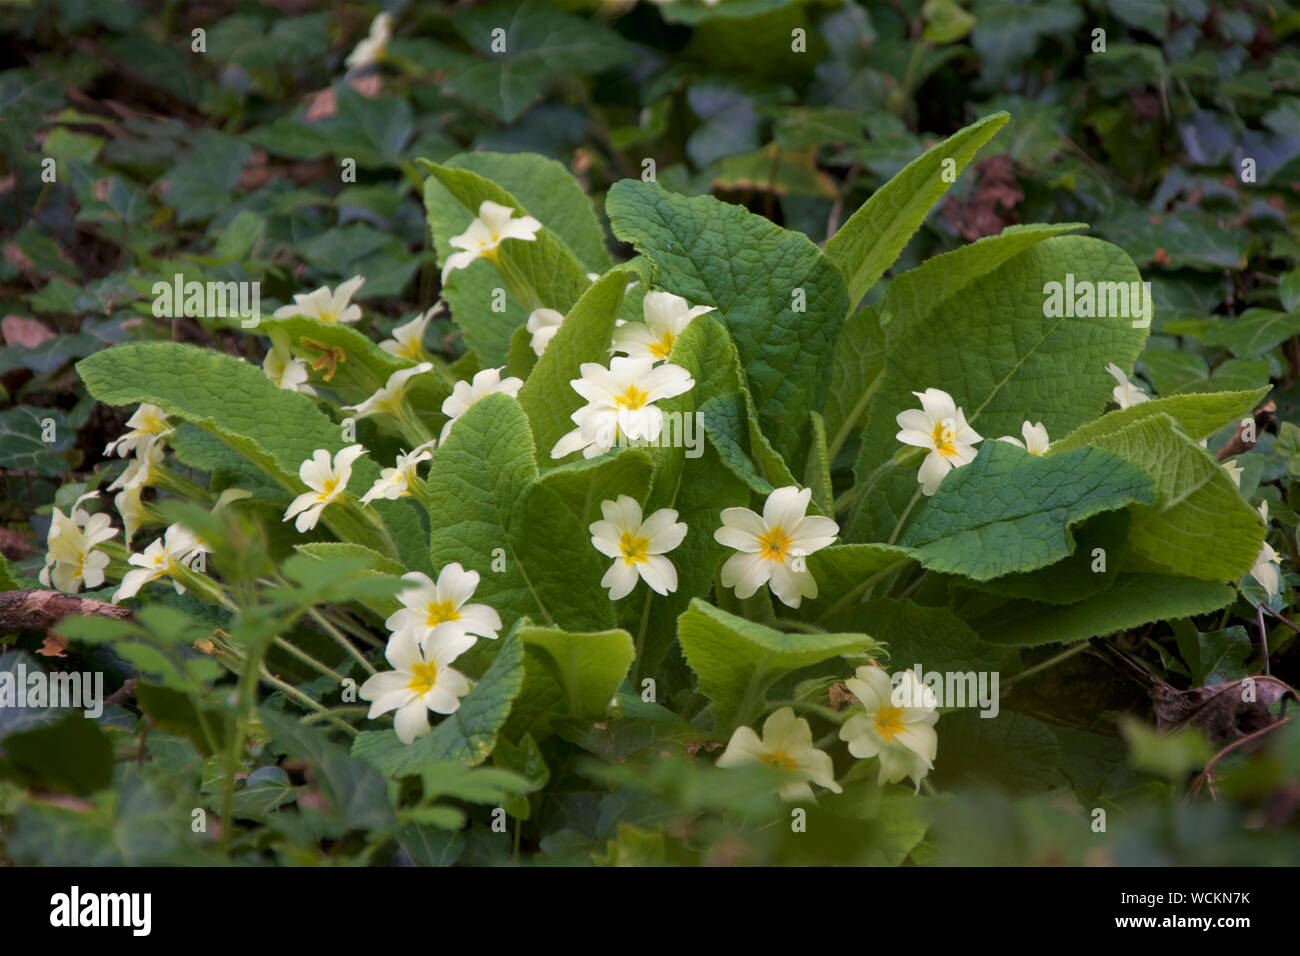 A clump of Early Woodland Primroses Stock Photo